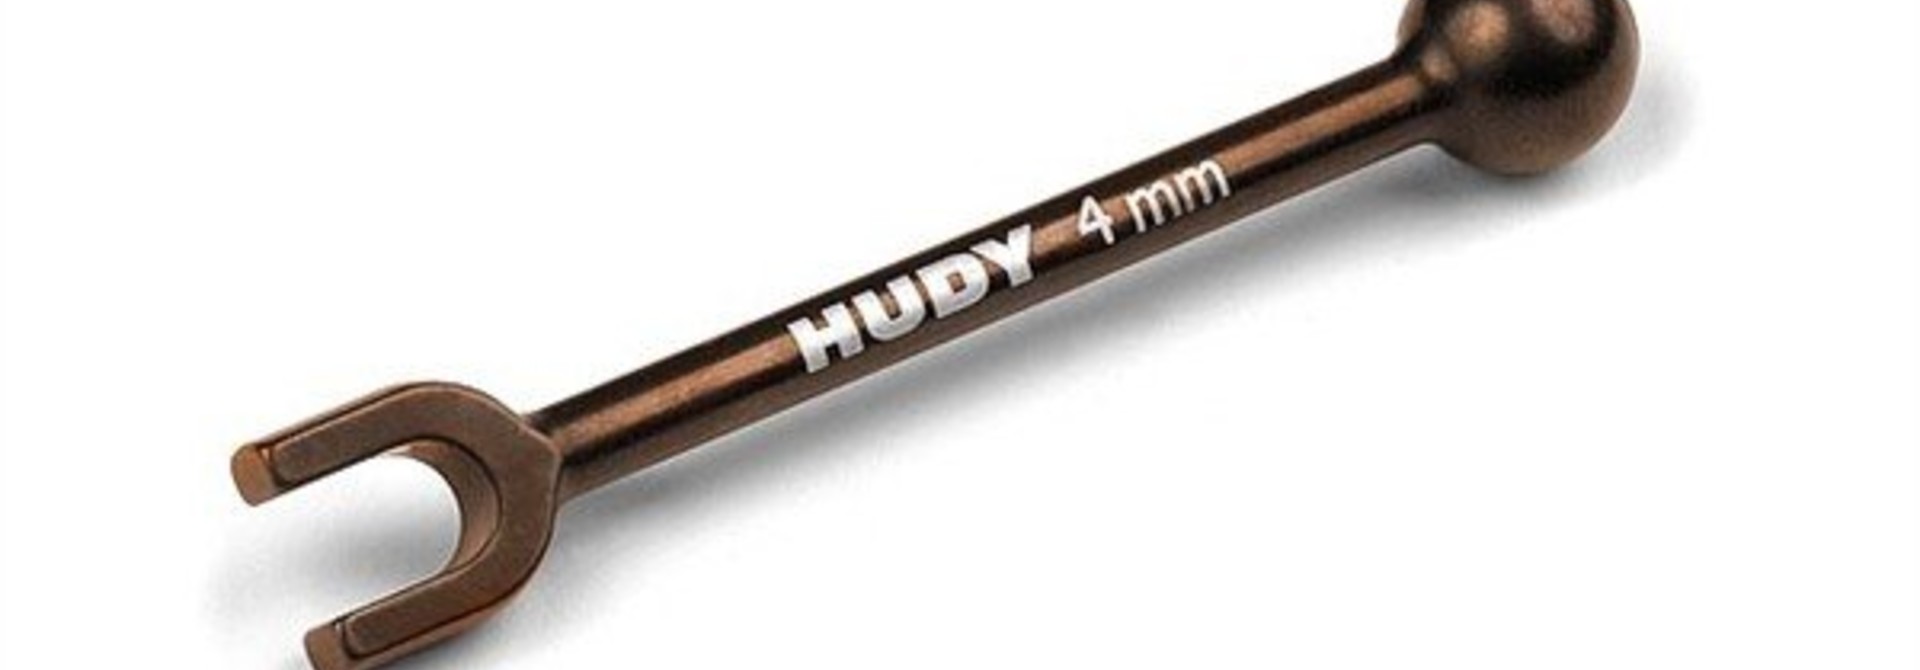 Hudy Spring Steel Turnbuckle Wrench 4mm. H181040